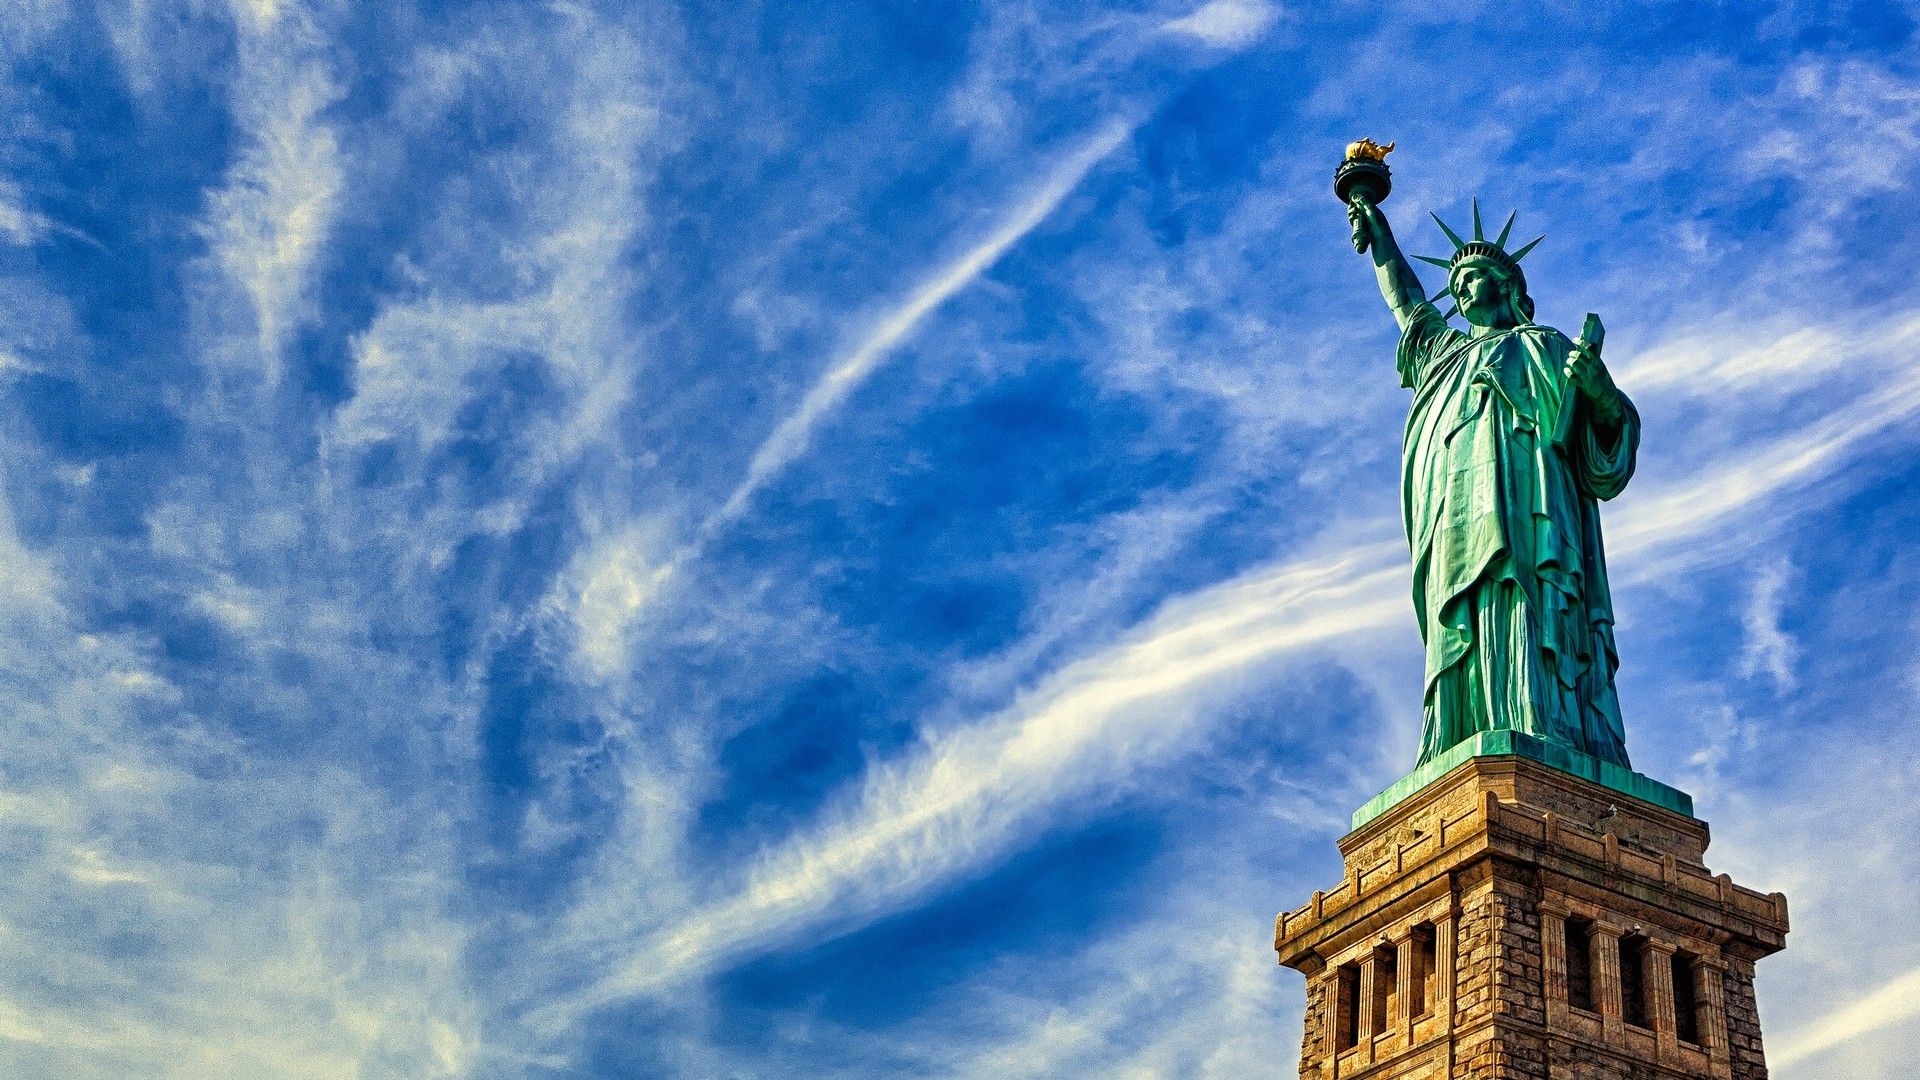 Statue of liberty in new york hd wallpaper | Wallpapers ...